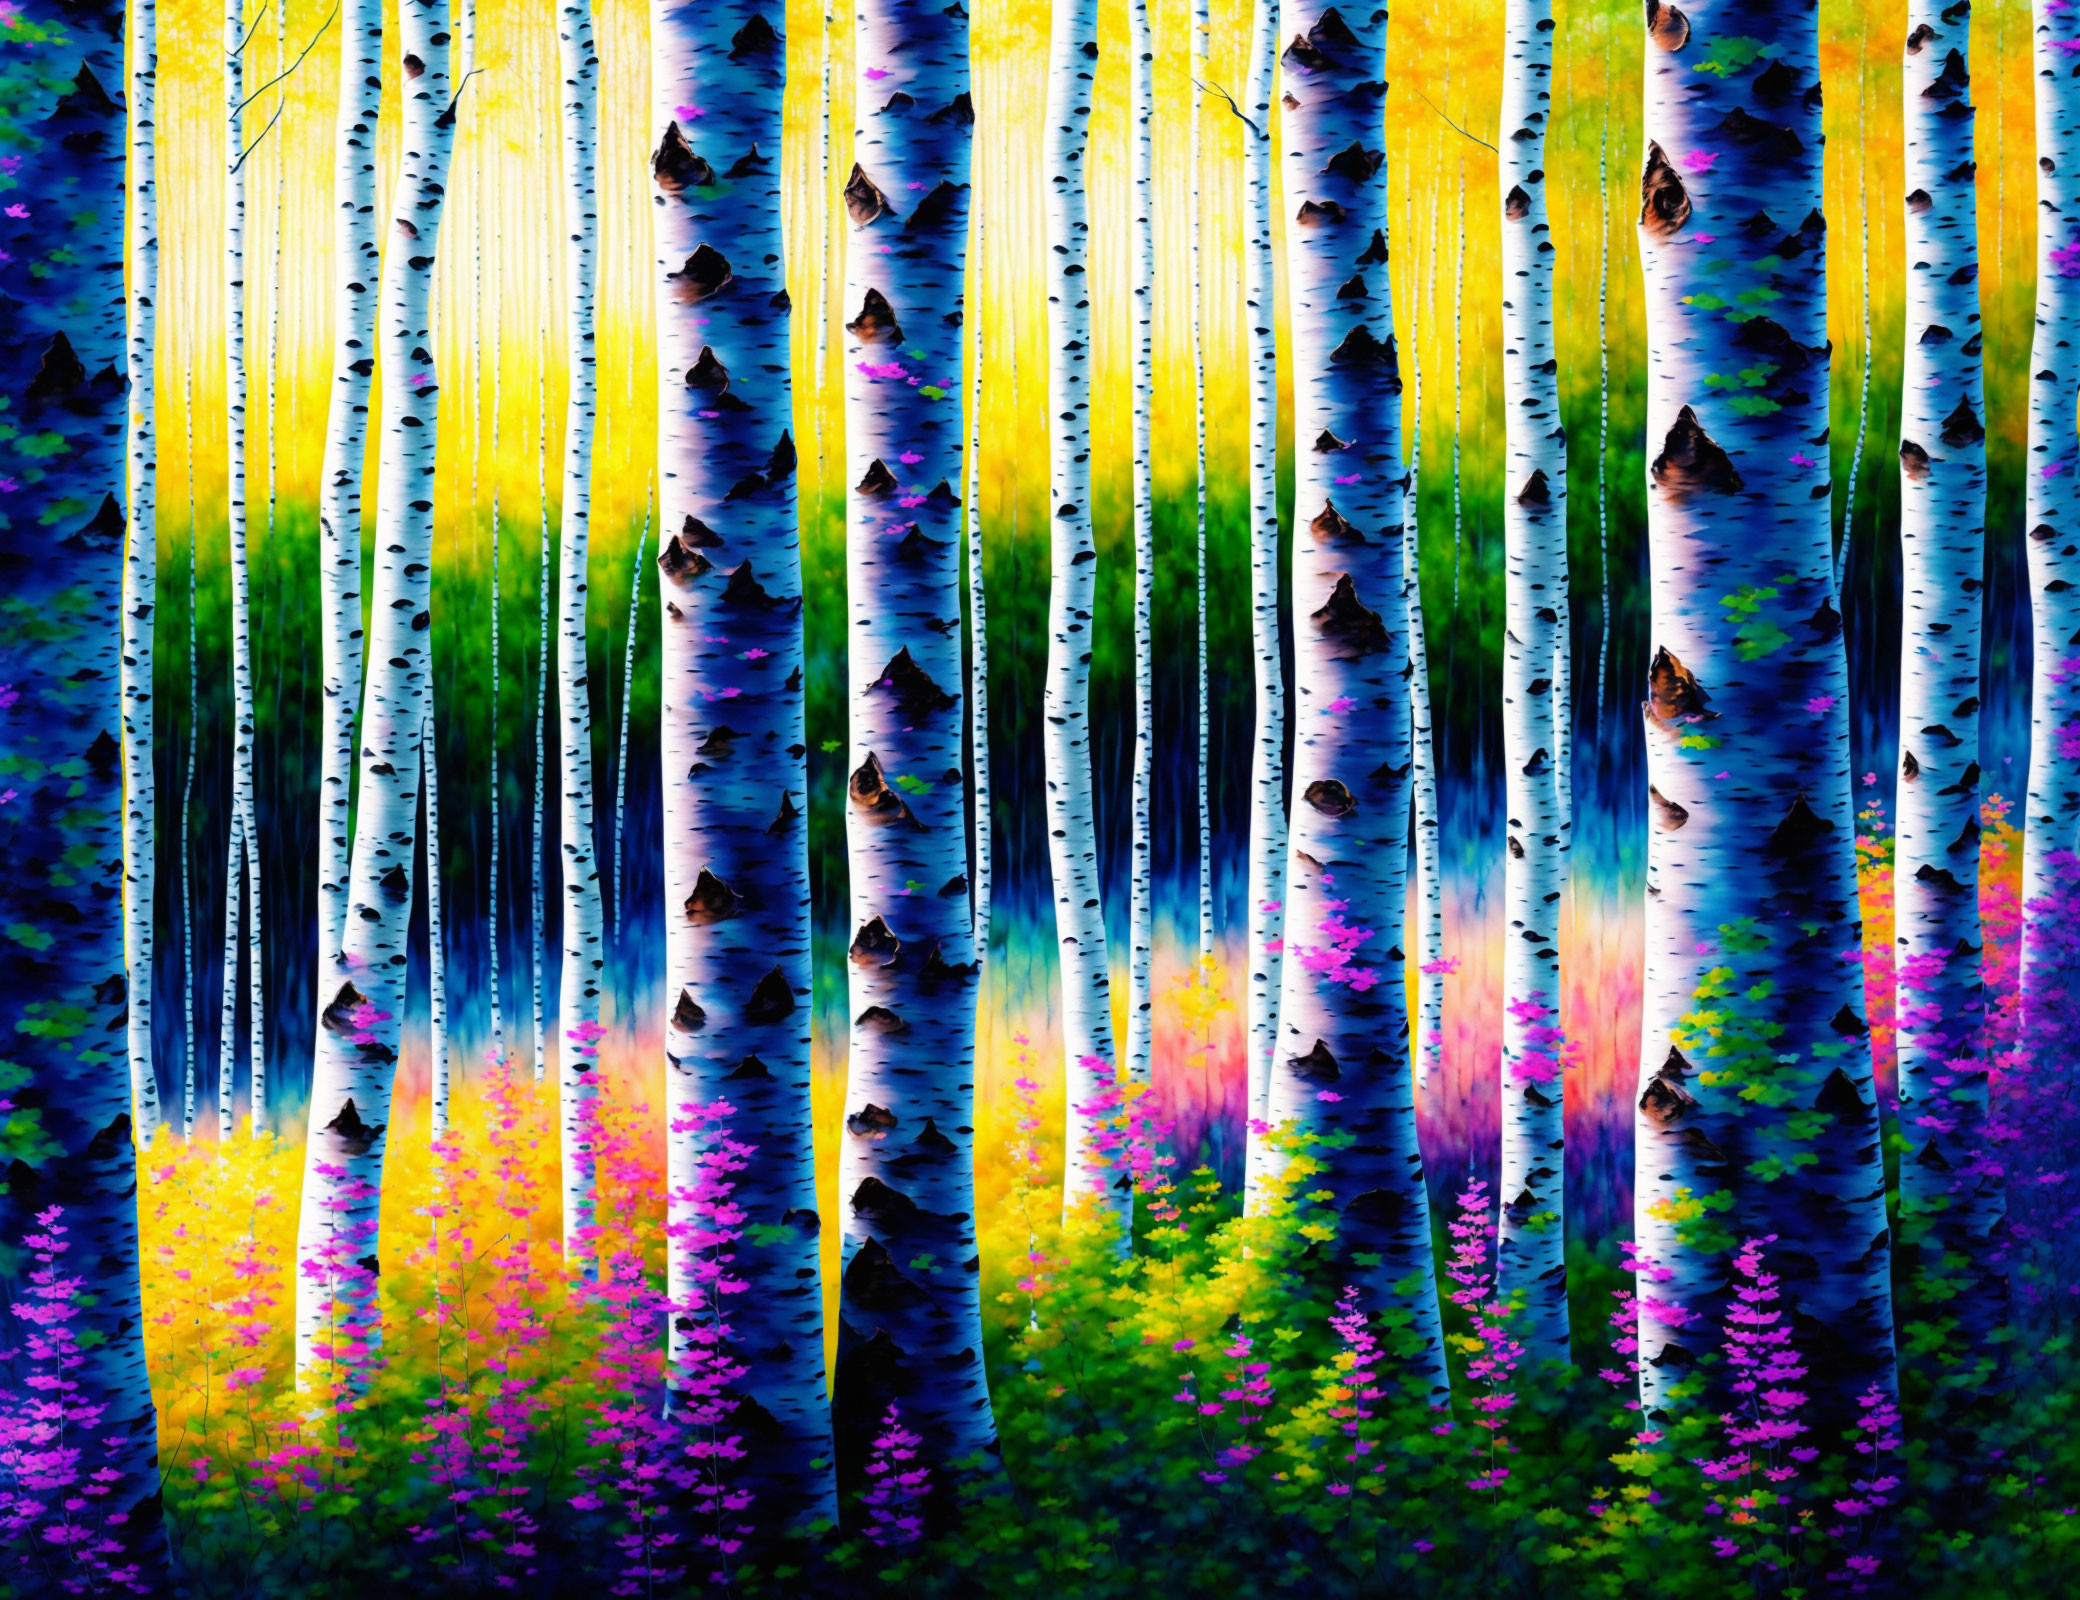 Colorful Abstract Forest Scene with Stylized Birch Trees and Purple Pink Flora